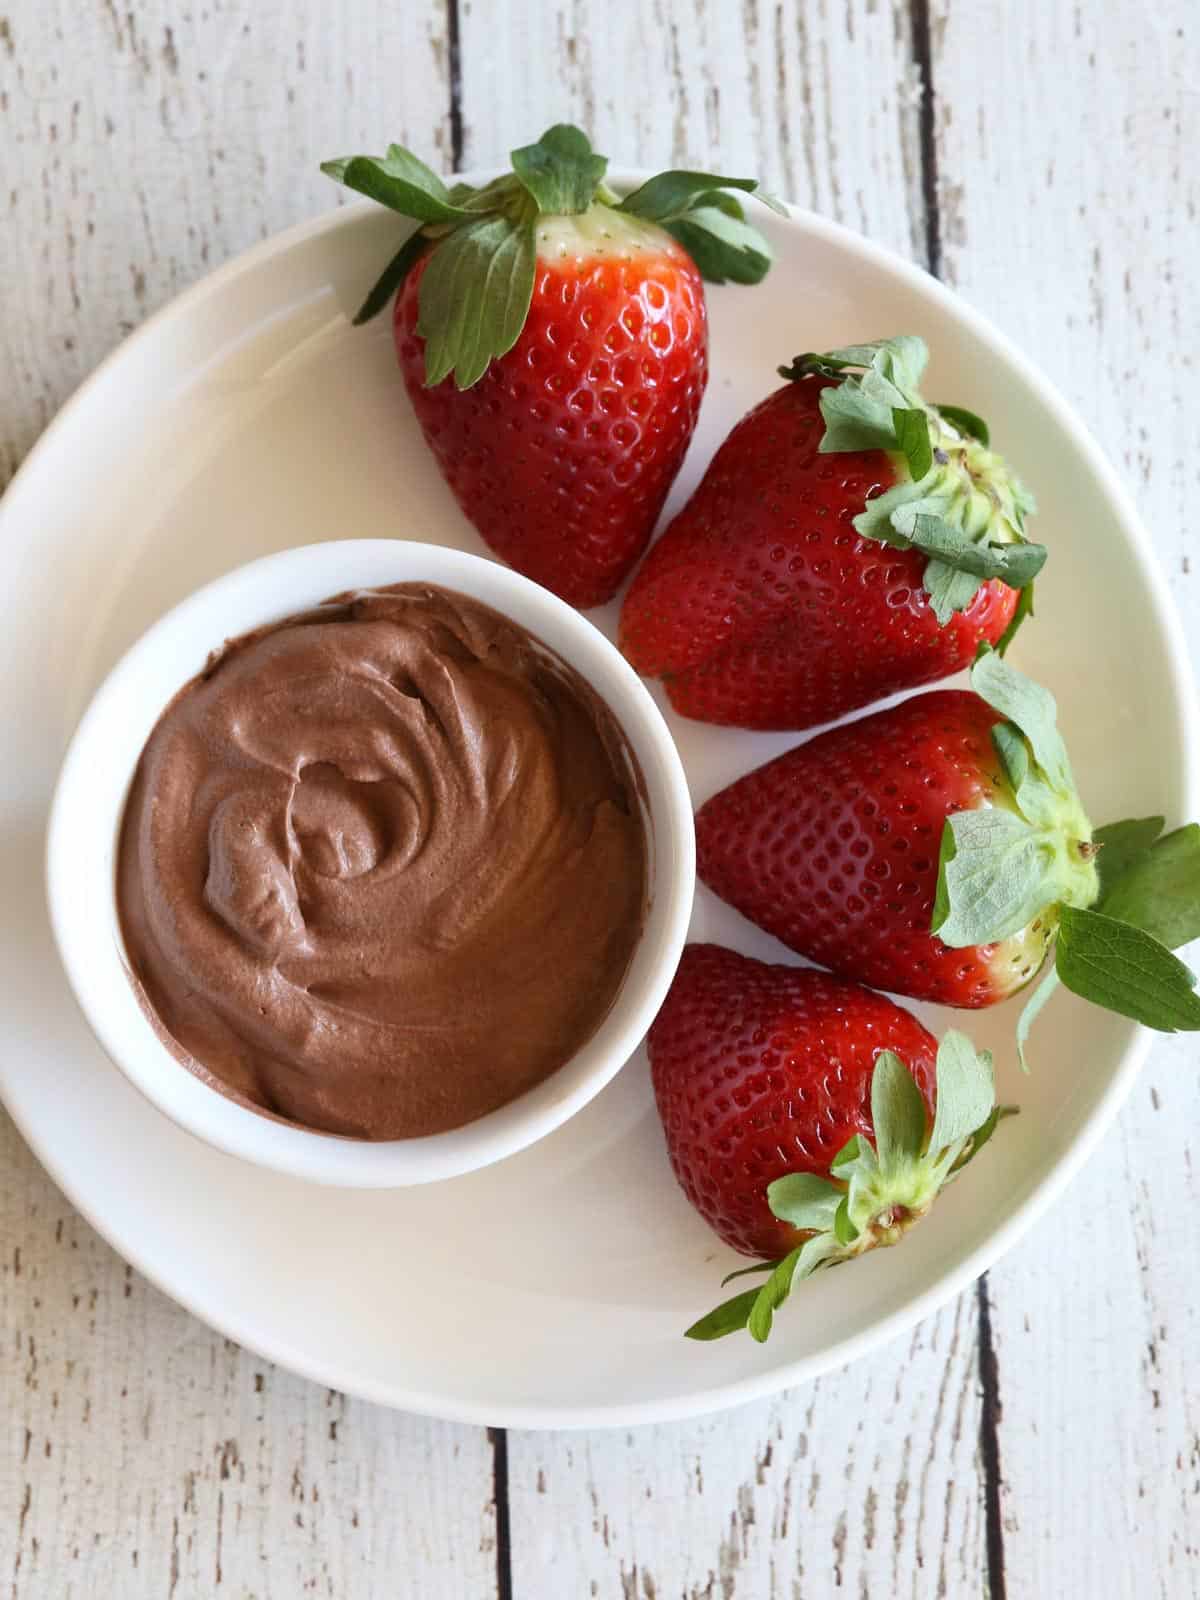 Keto chocolate mousse is served with strawberries.